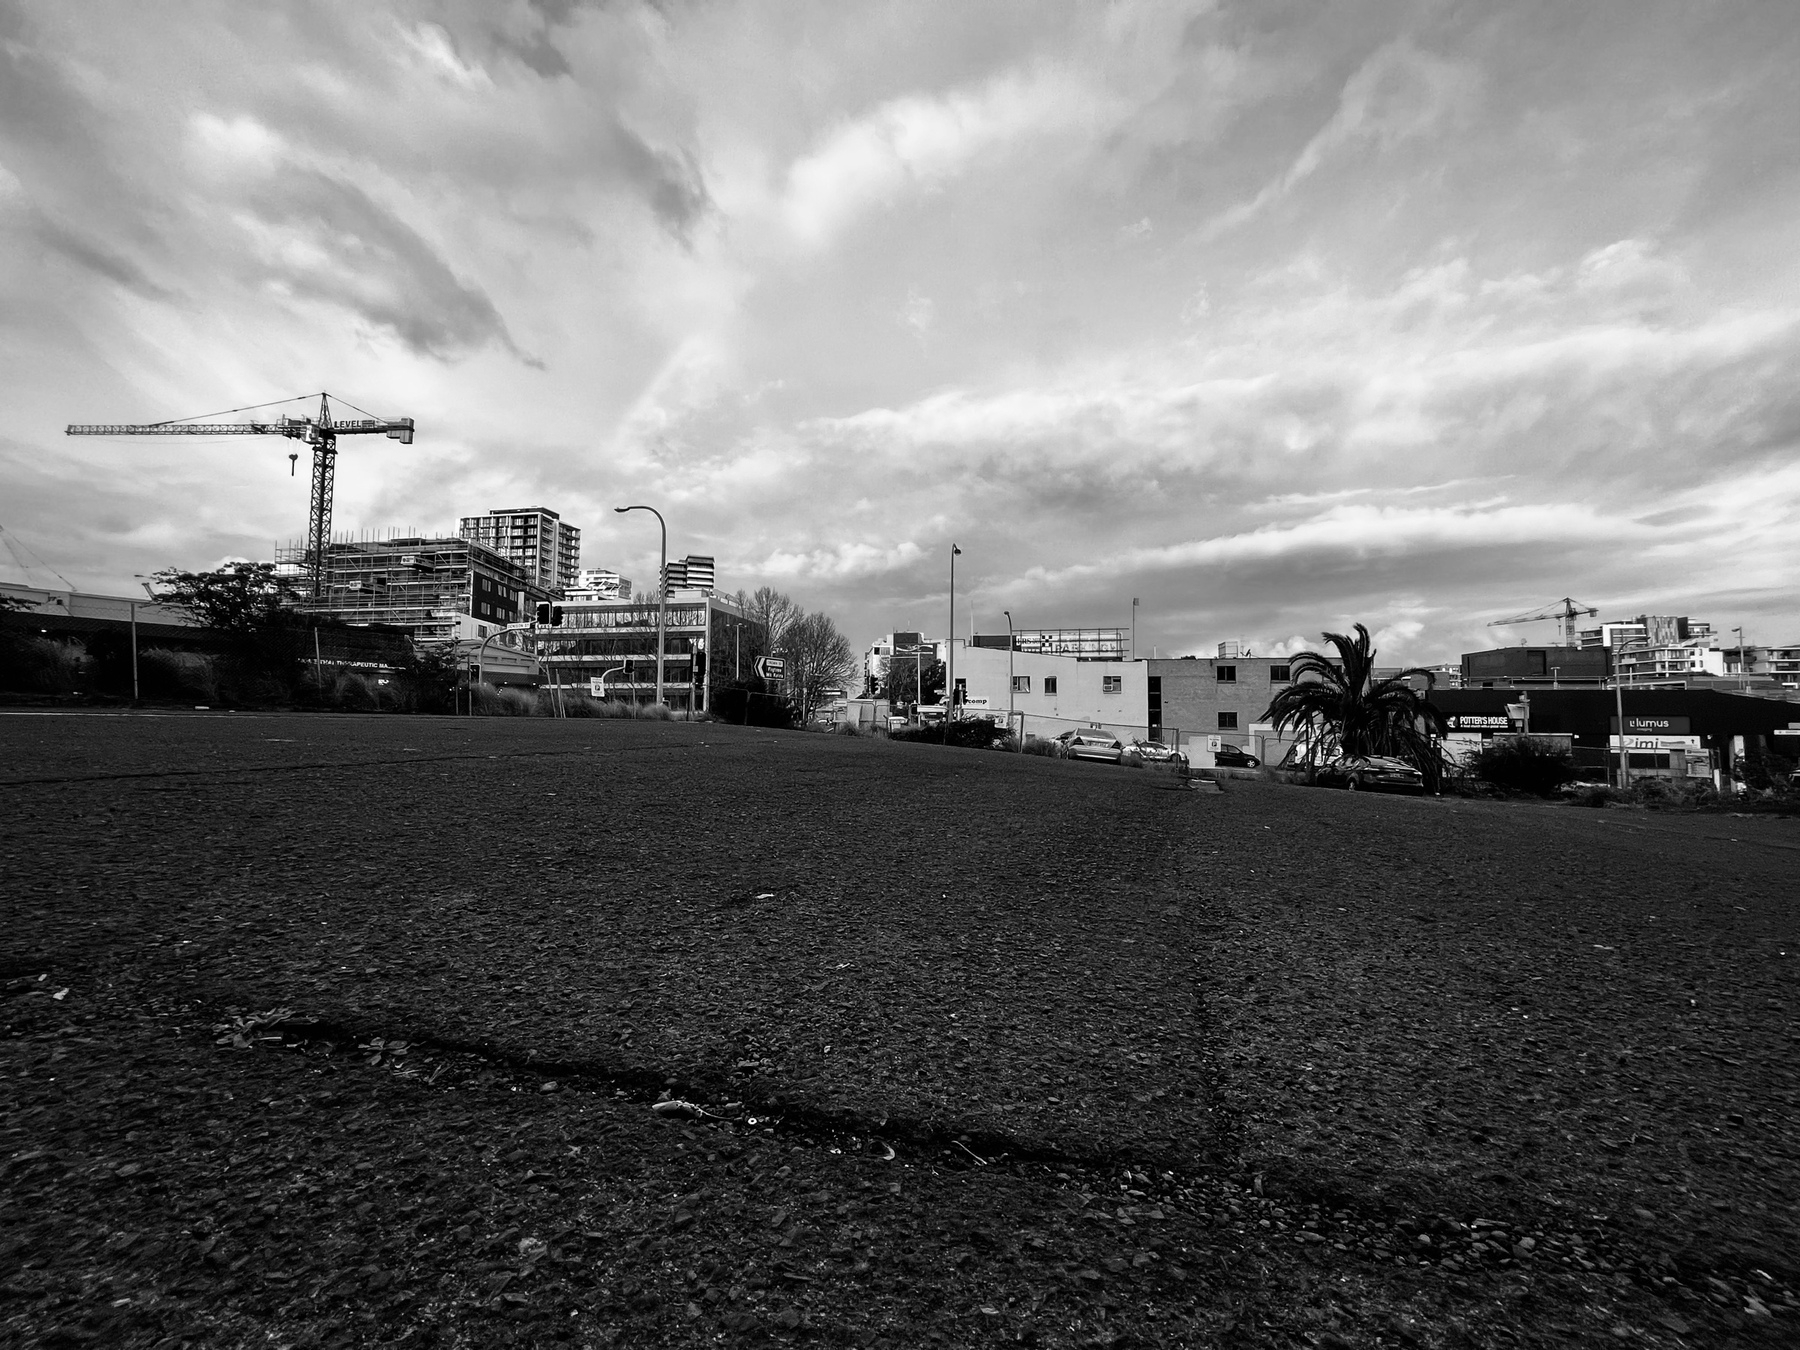 A wide-angle shot that shows a rough road surface in the lower half of the picture and buildings, a crane and the sky in the distance